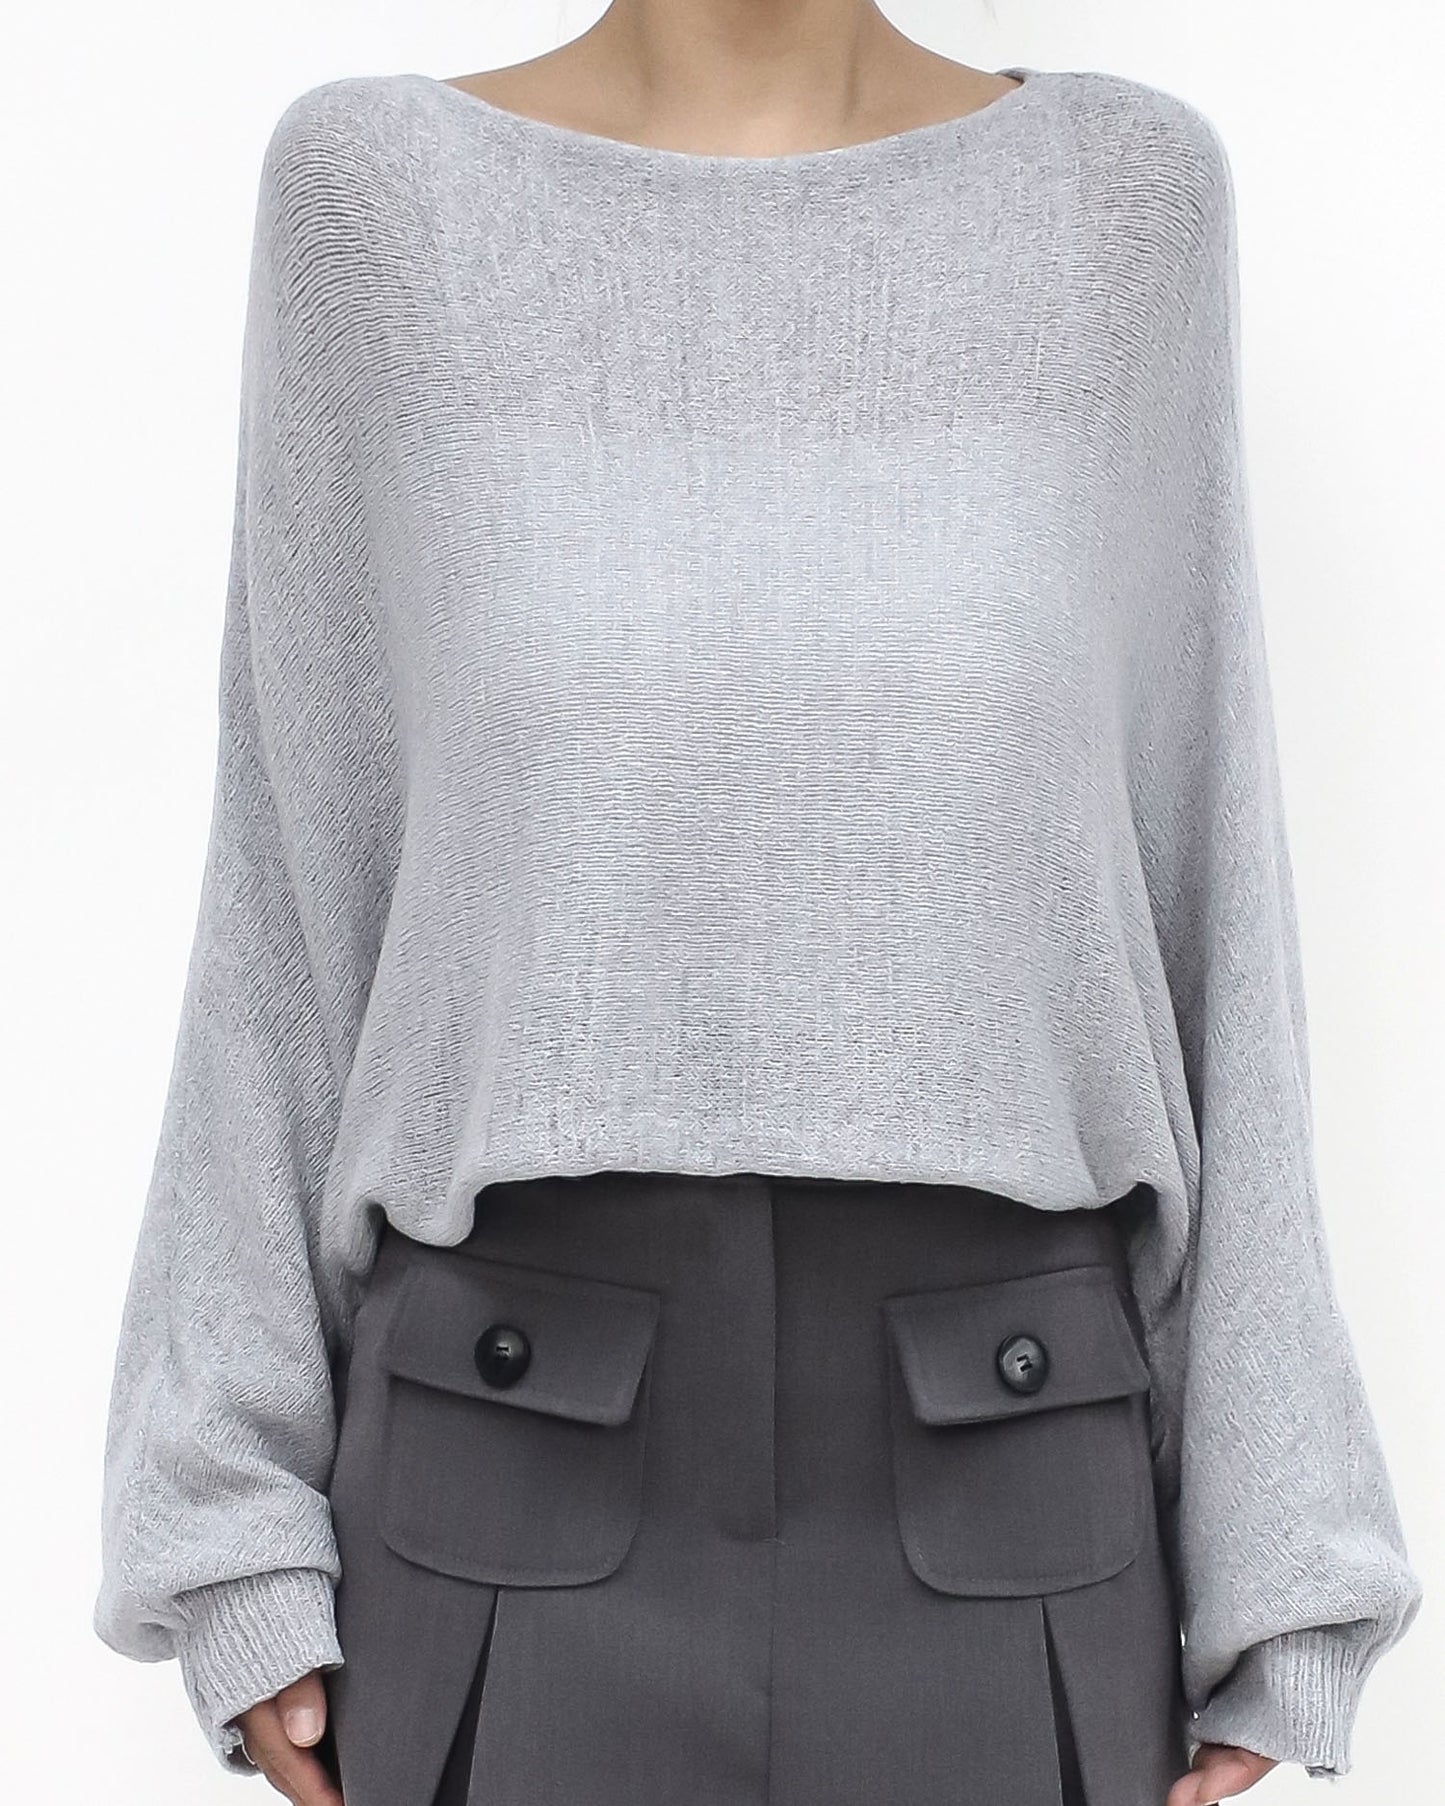 grey batwing fine knitted top